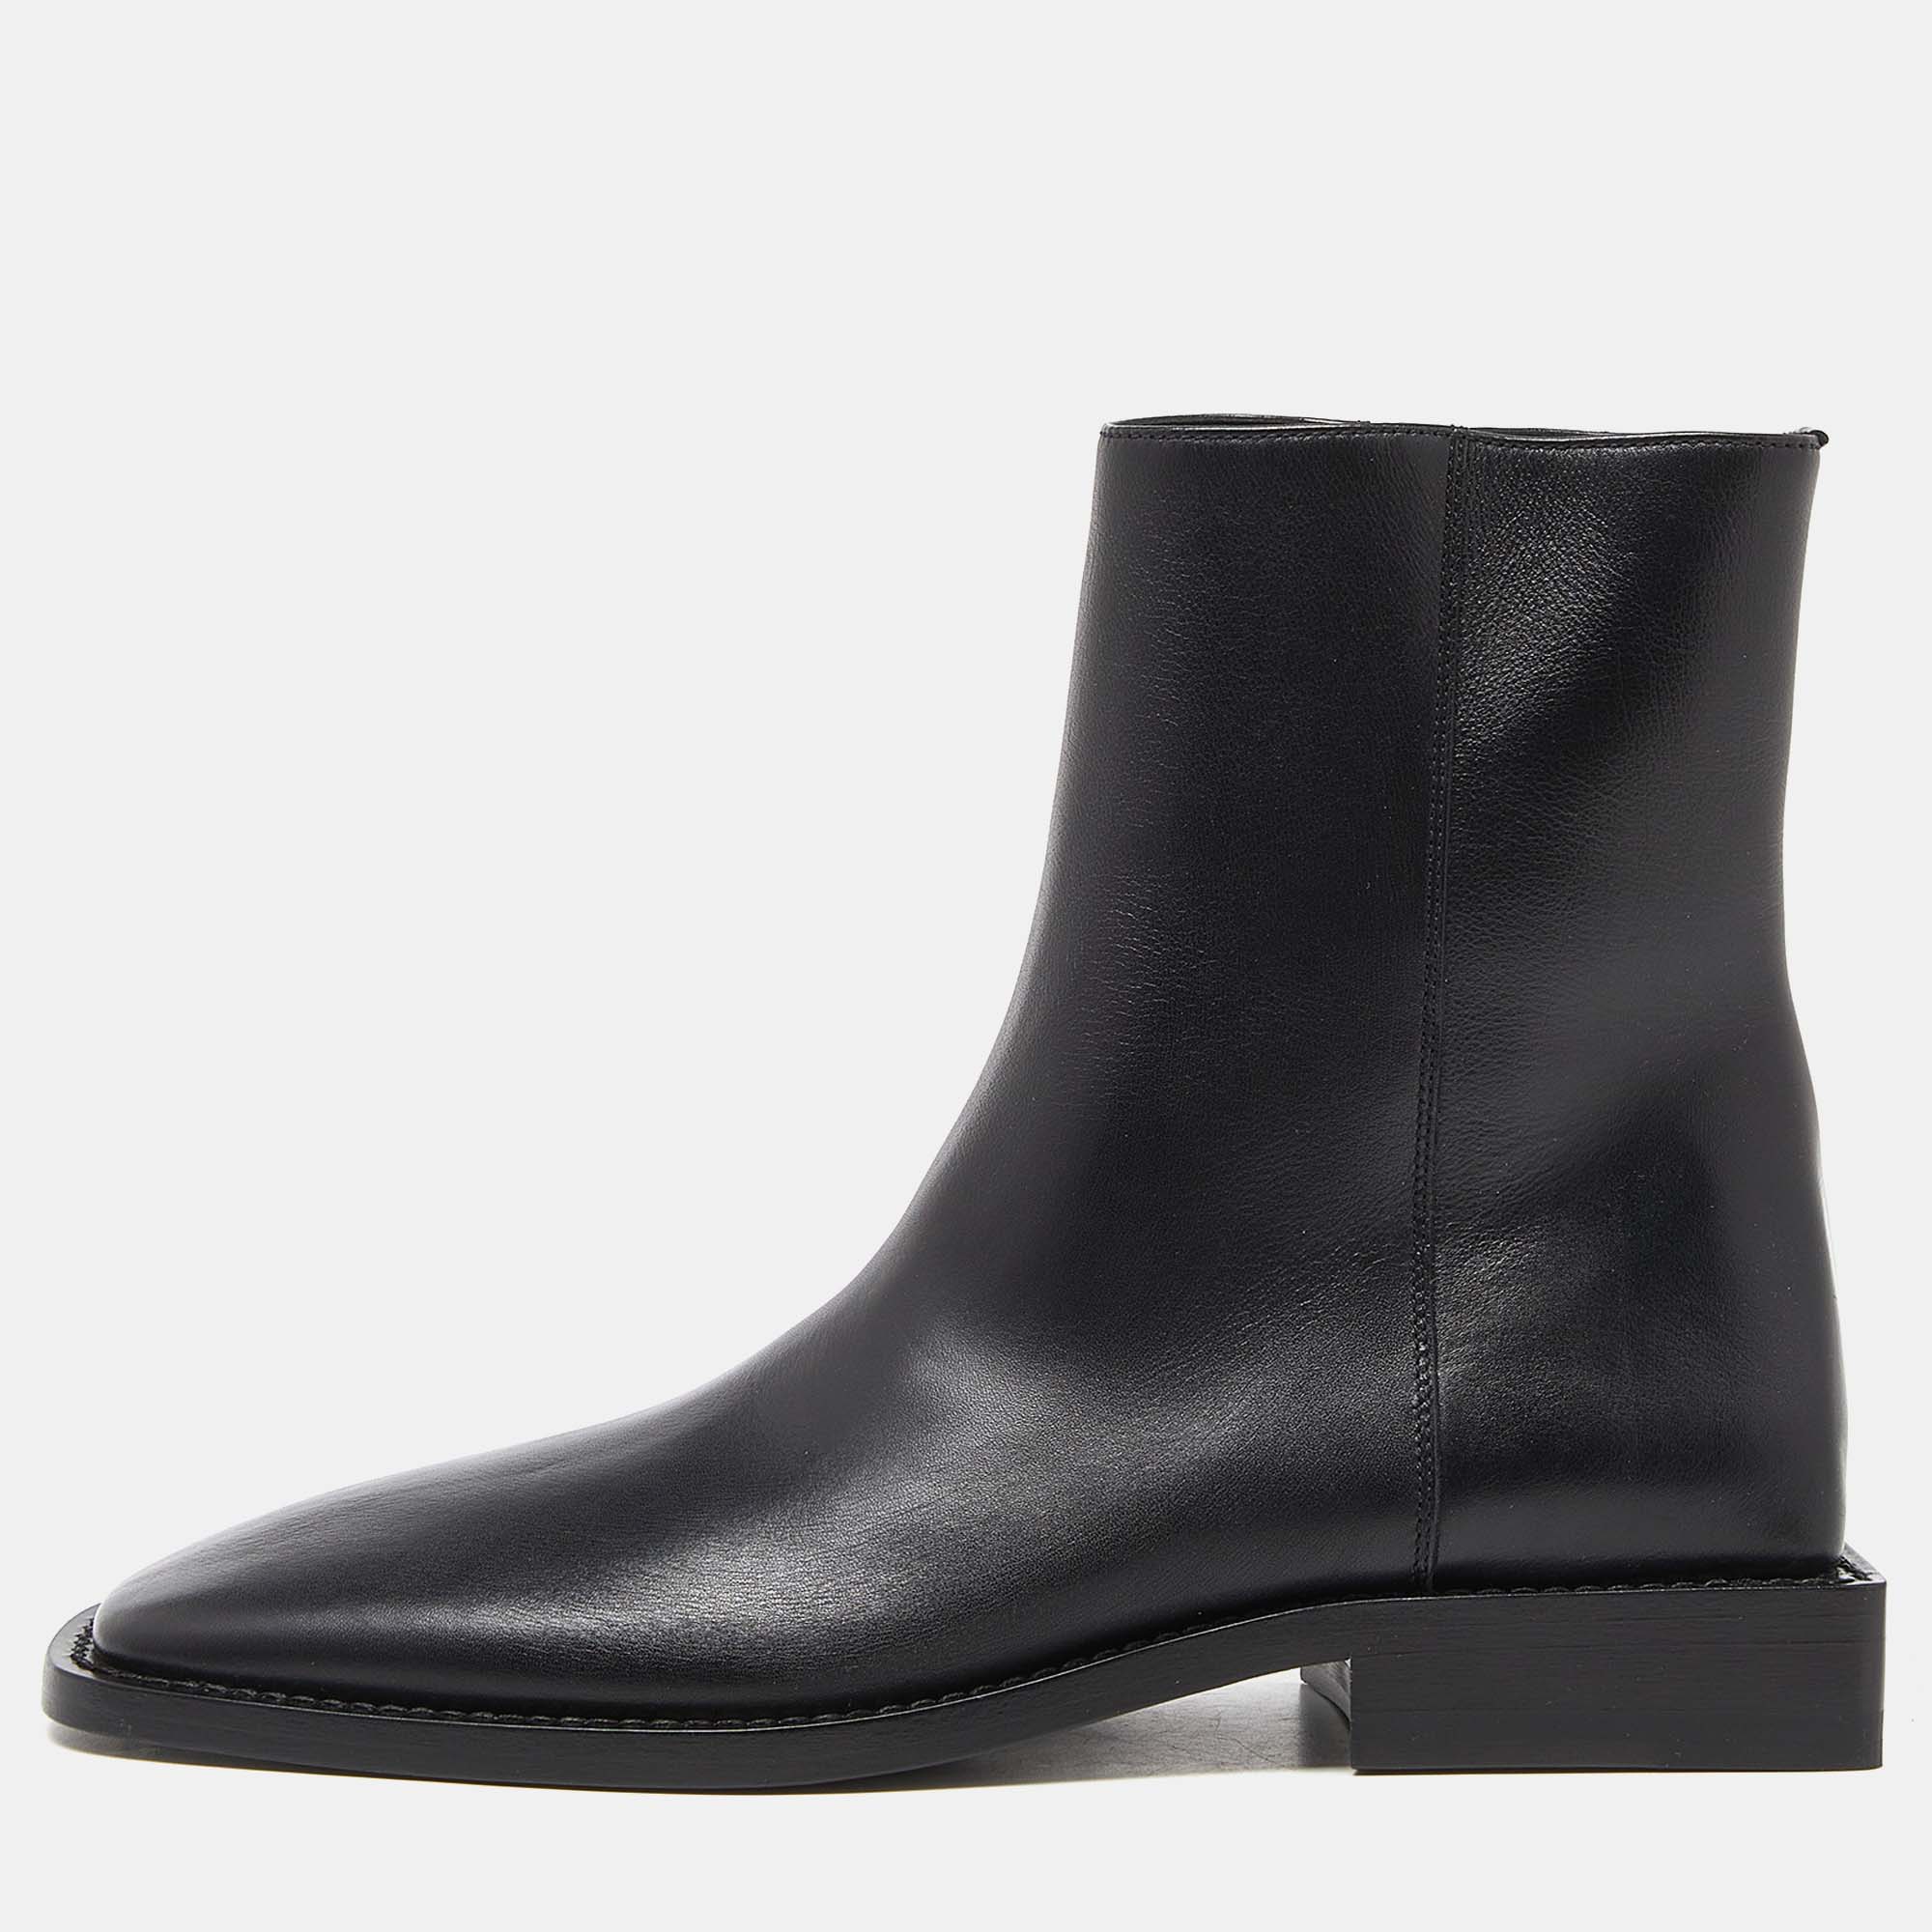 Balenciaga black leather ankle boots size 38.5